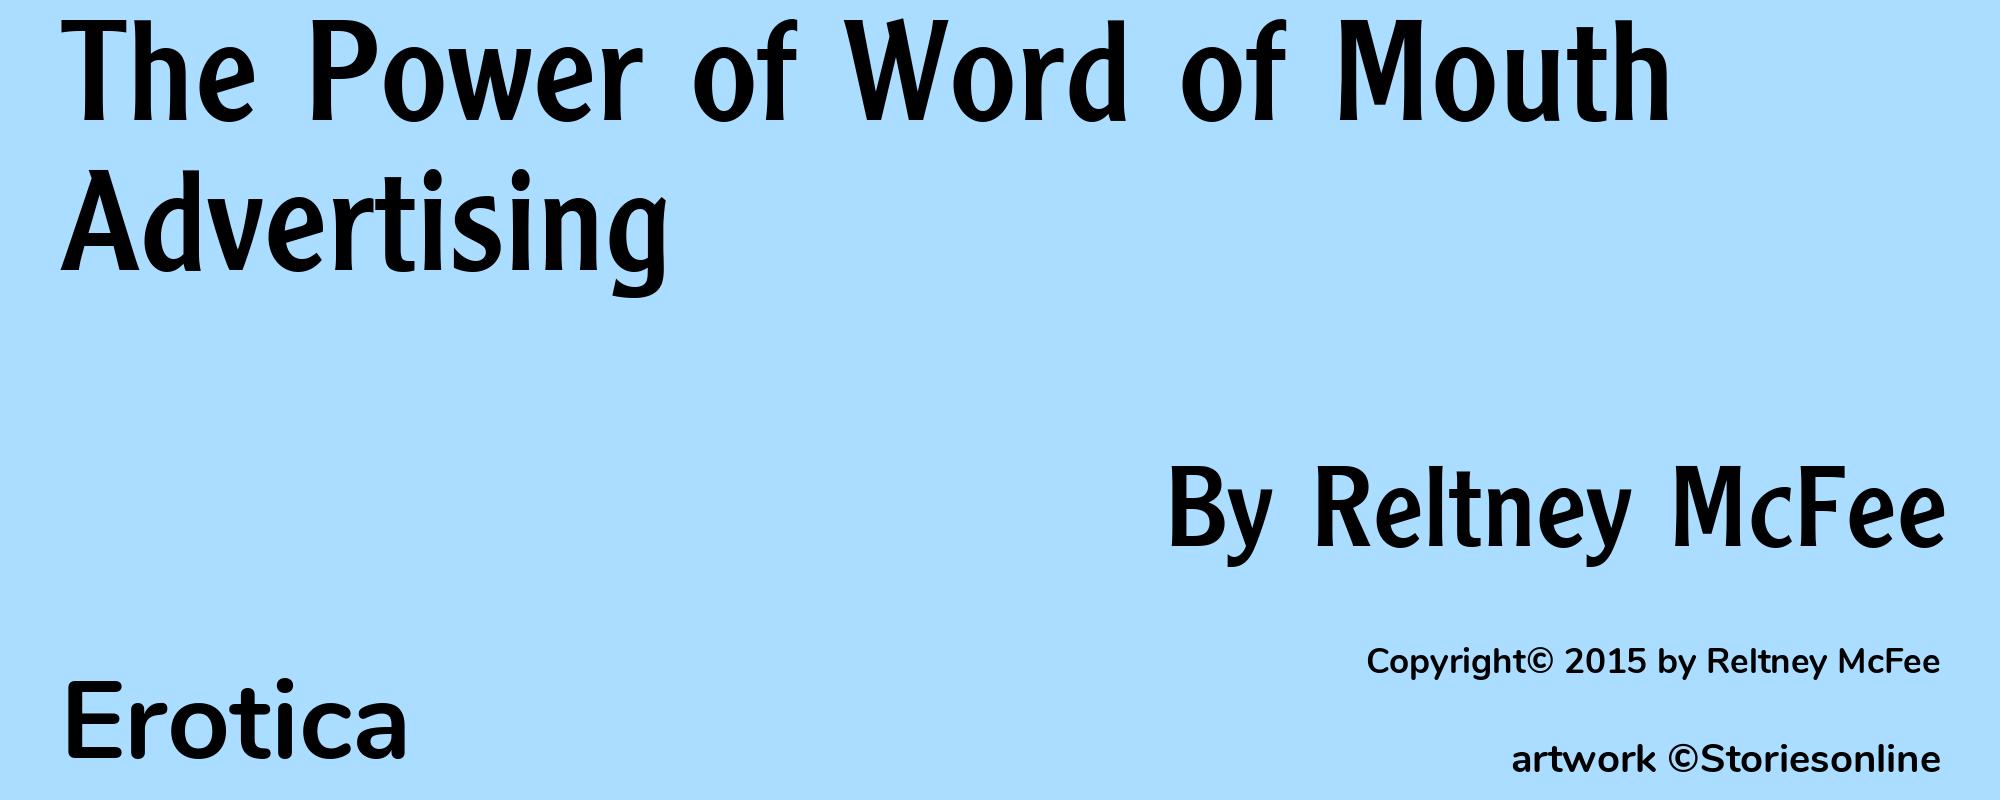 The Power of Word of Mouth Advertising - Cover